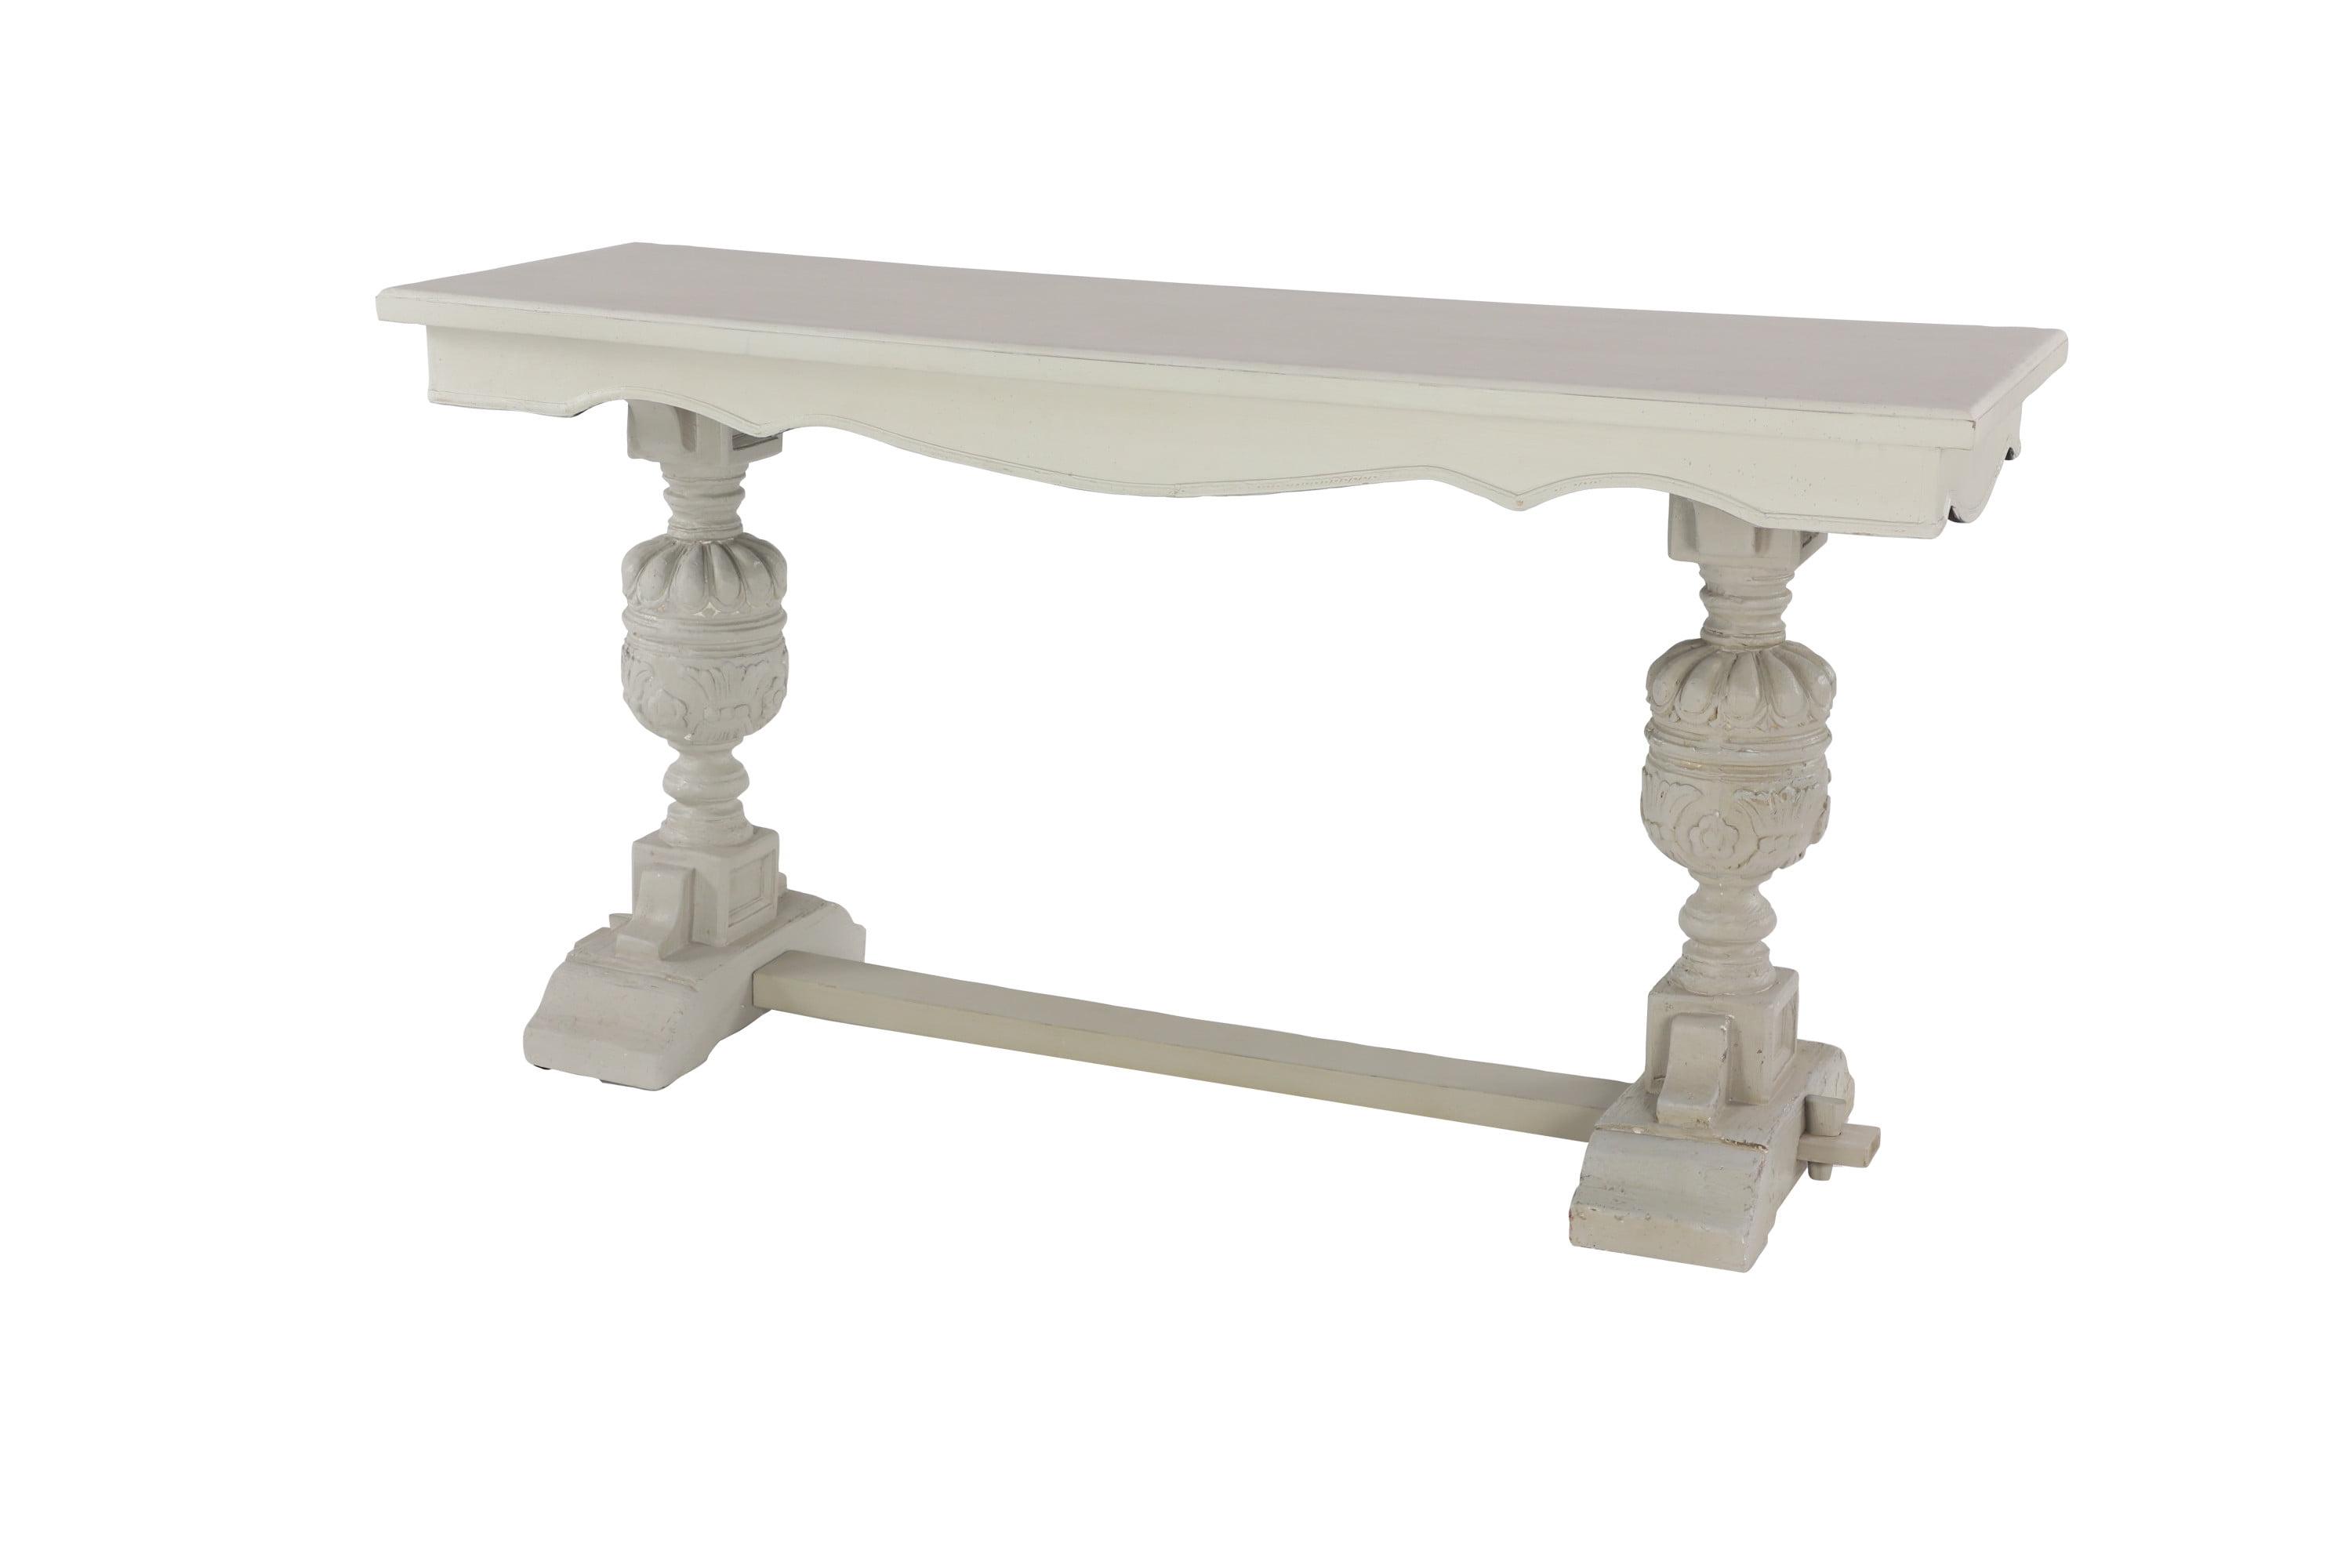 Elegant Pine Wood Console Table in White with Glass Top, 59"